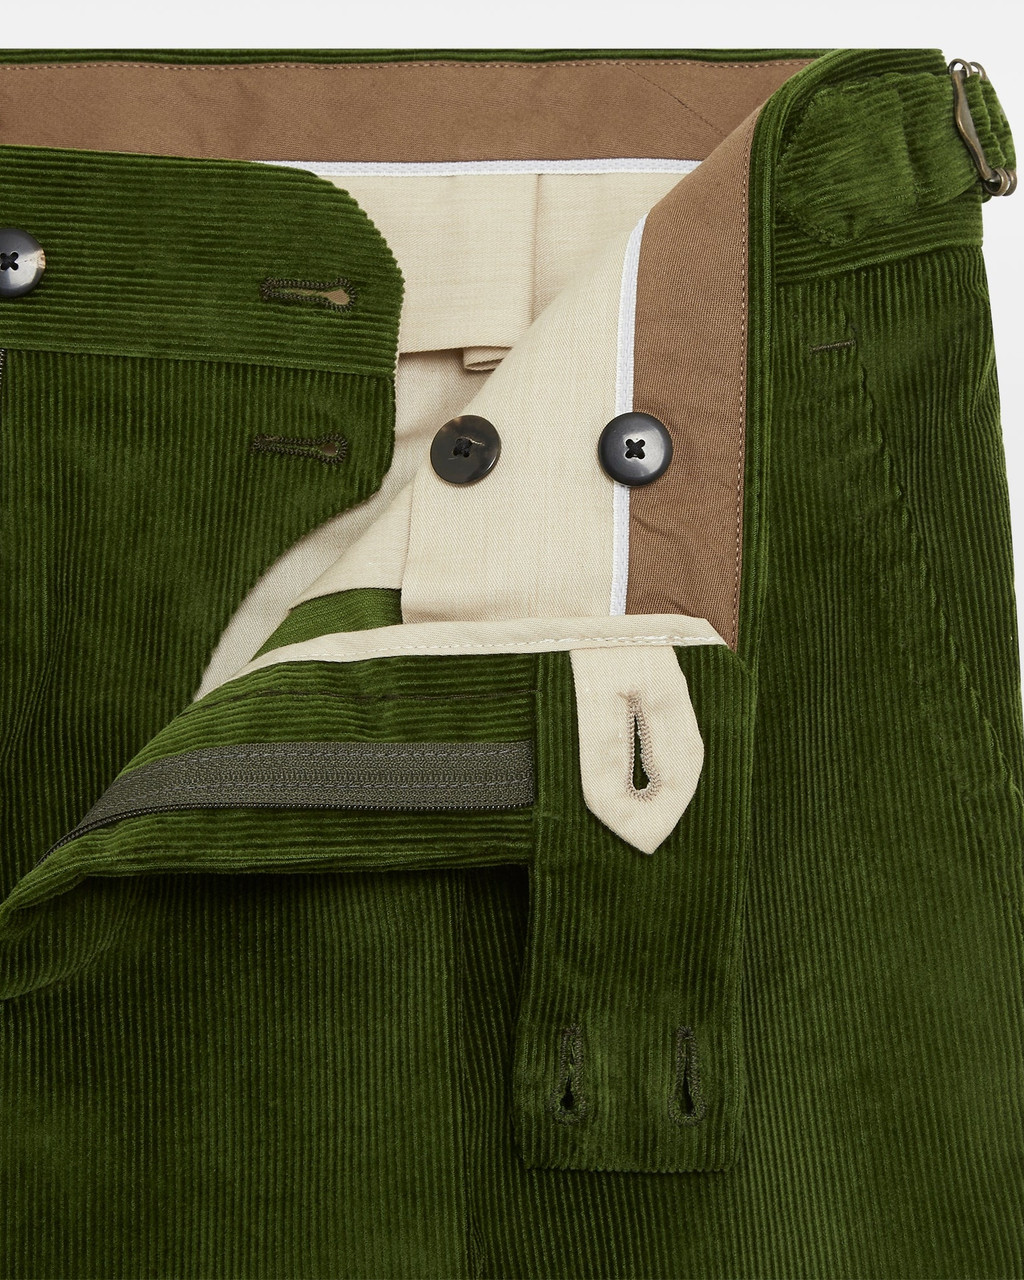 bound Army Green Corduroy Trousers – UN:IK Clothing